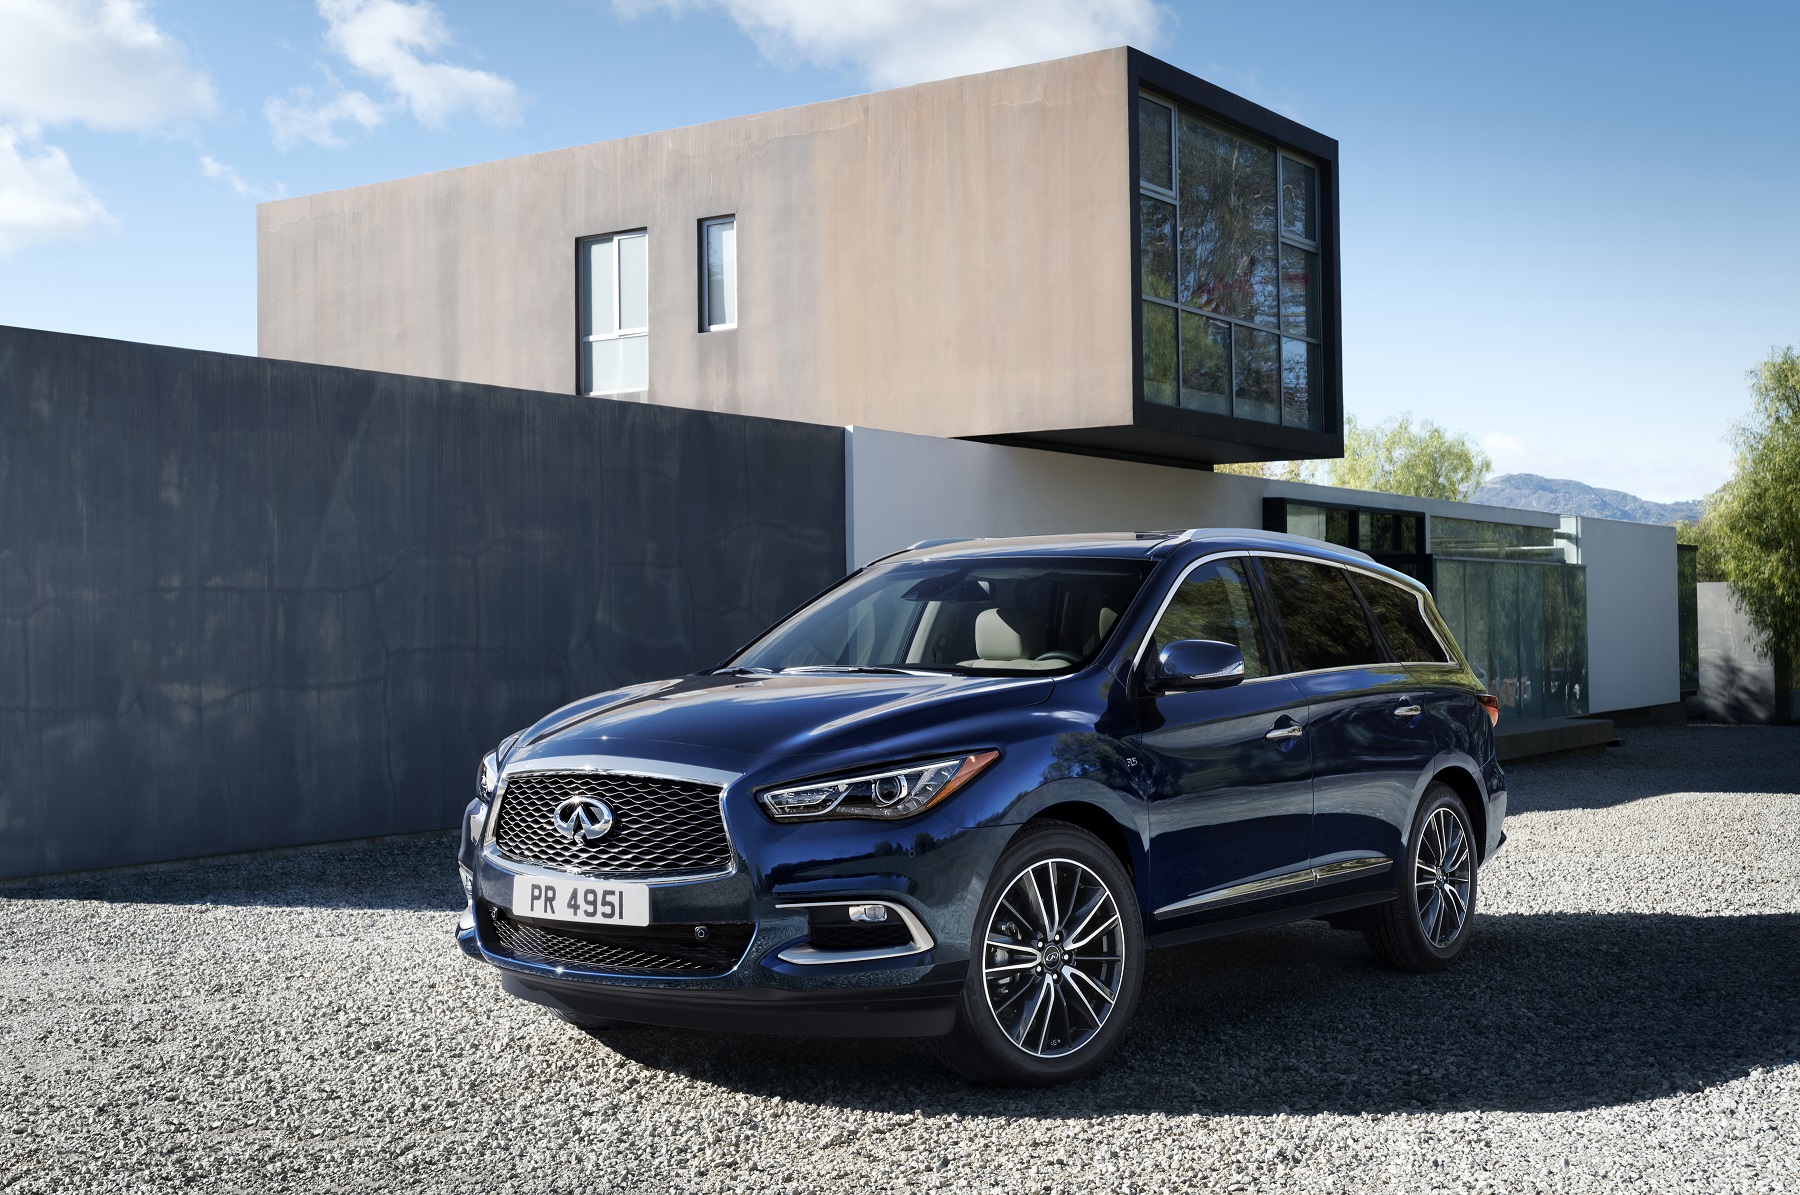 Infiniti QX60 delivers empowering performance, rewarding driving experience